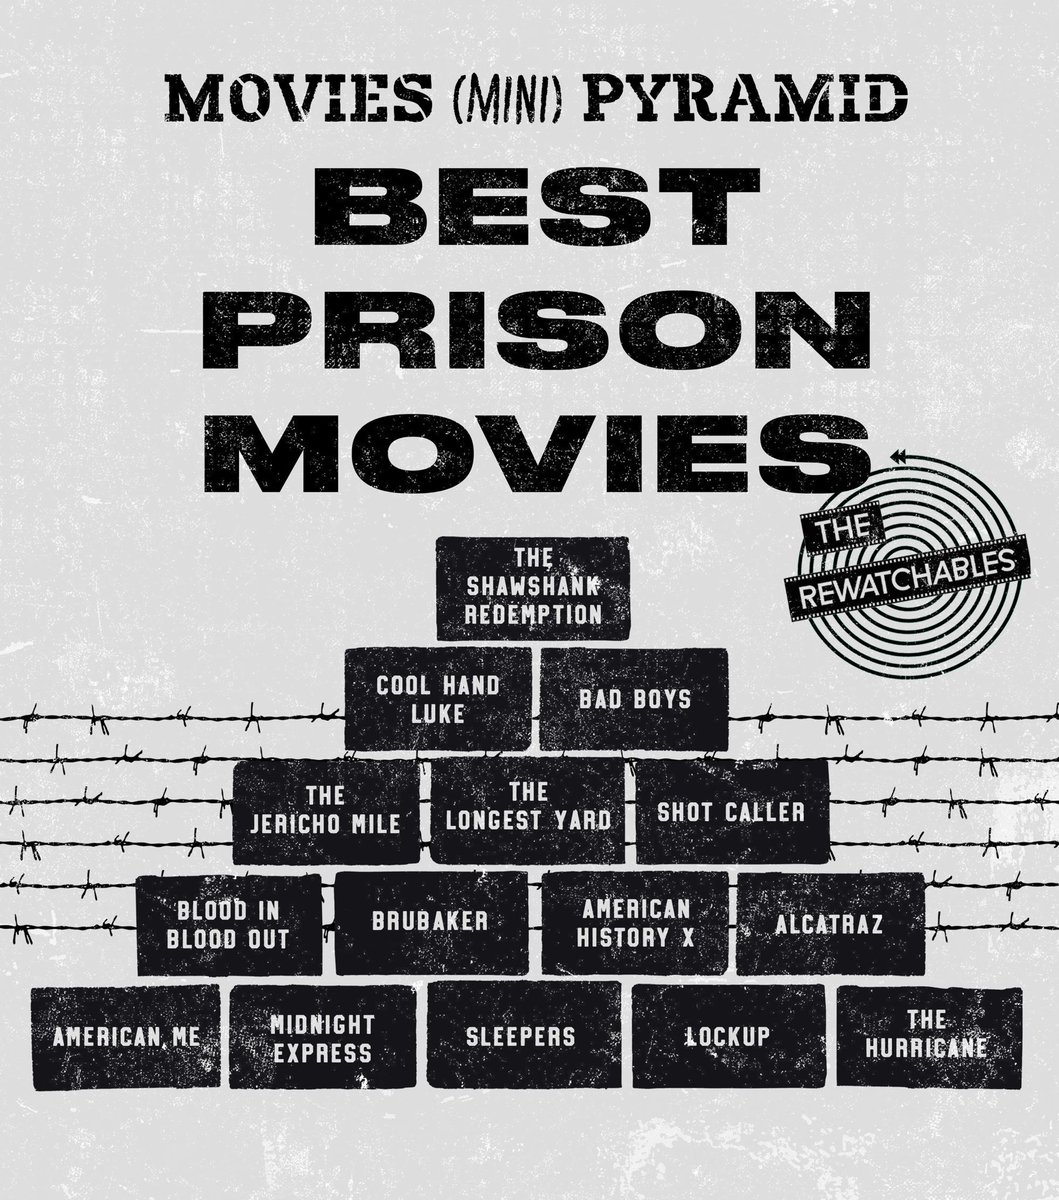 After the pod discussion about #ShotCaller, here is @BillSimmons’s Best Prison Movies (Mini) Pyramid